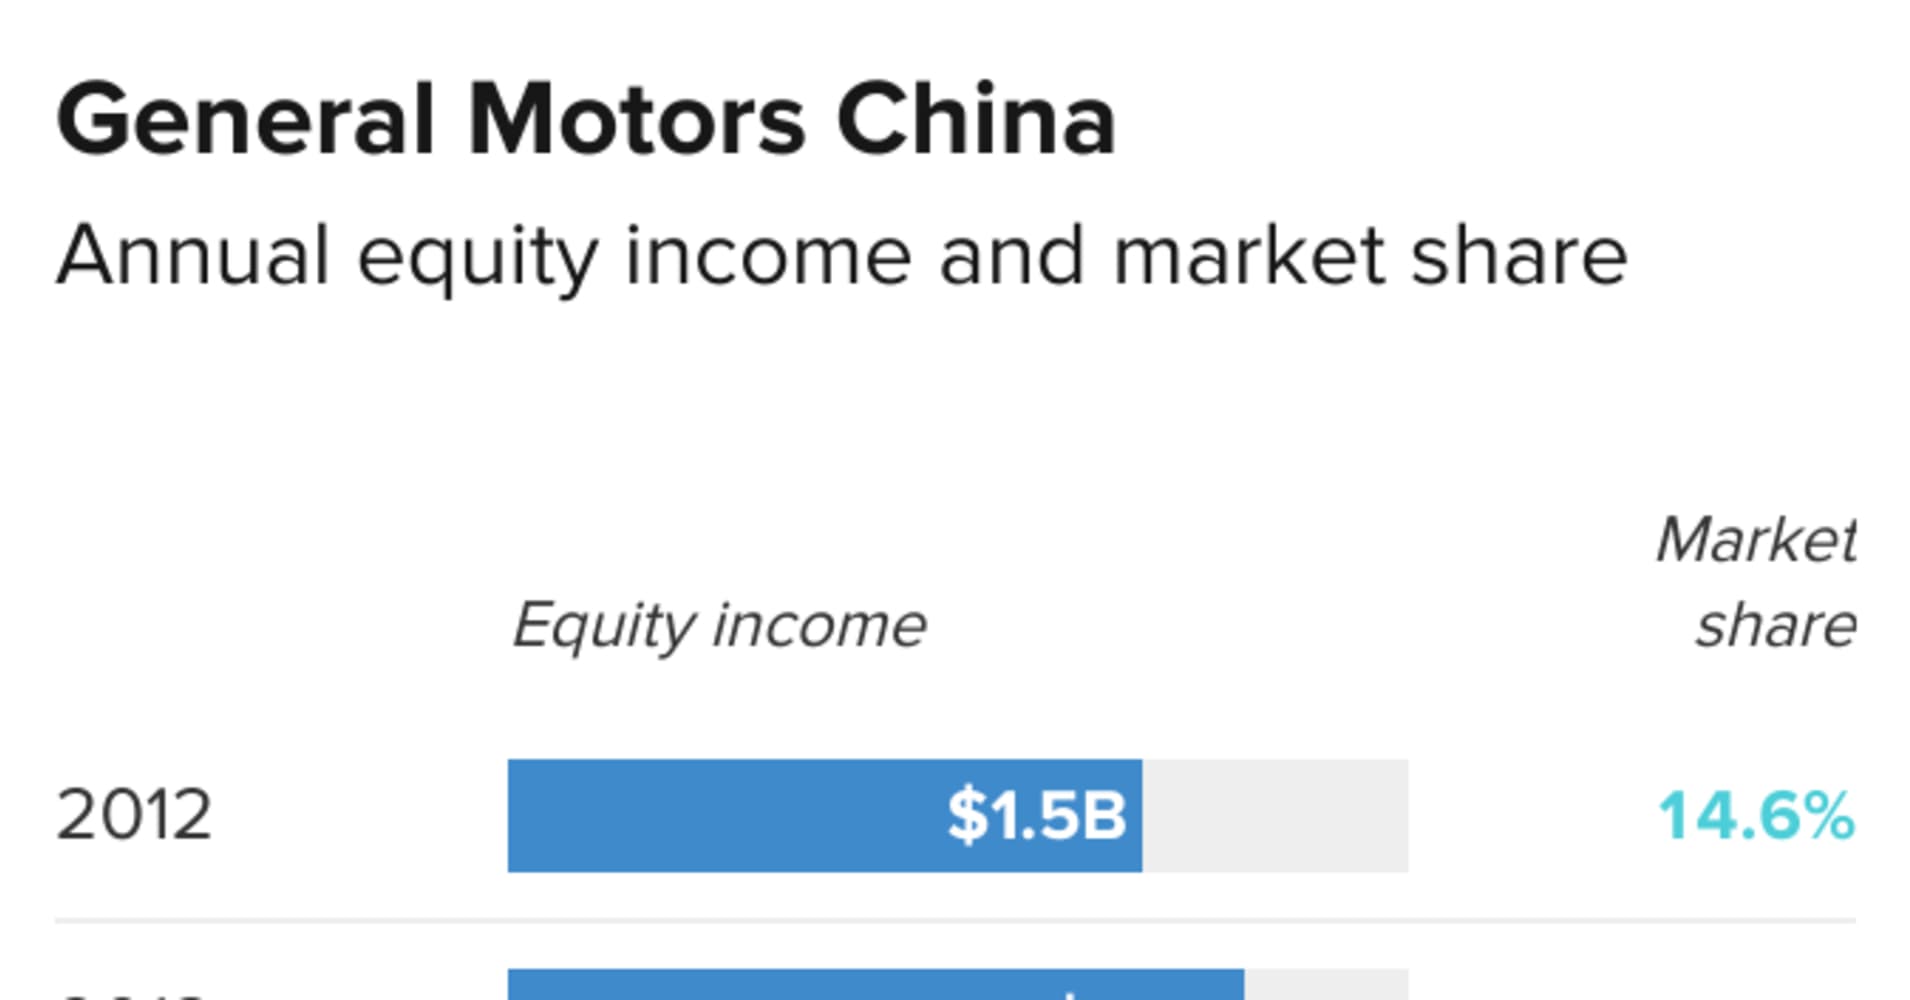 u.s. automakers like gm are rapidly losing ground in china, once an engine for growth